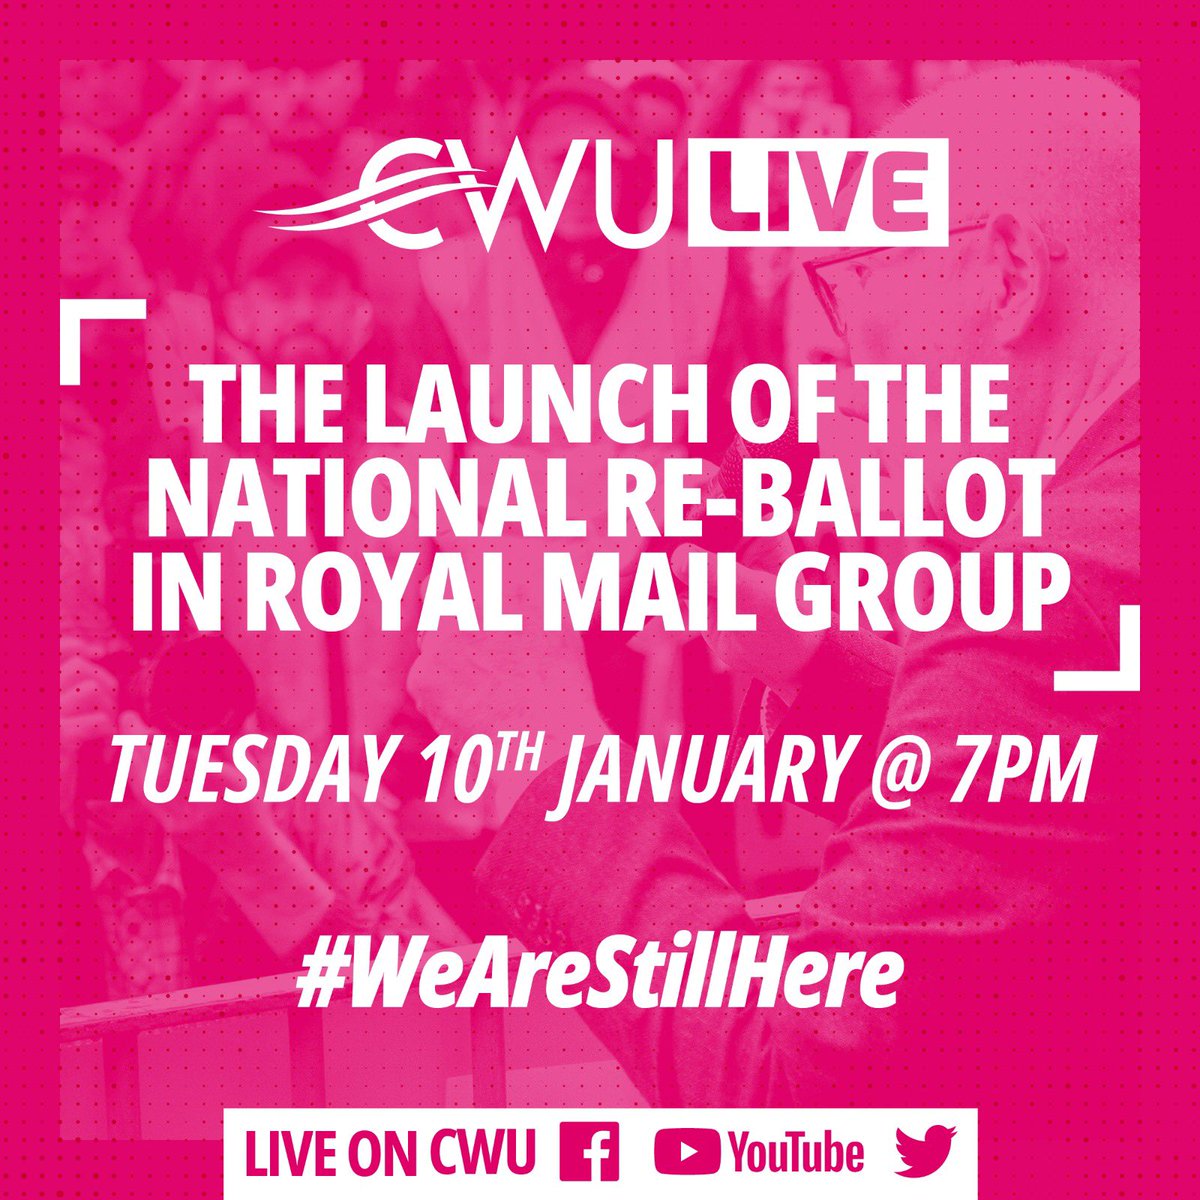 Due to the anti-union laws, we have to renew our mandate in the Royal Mail Group dispute. 

Join us tomorrow at 7pm as we launch the timetable and campaign for the re-ballot. 

#WeAreStillHere #ymaOhyd